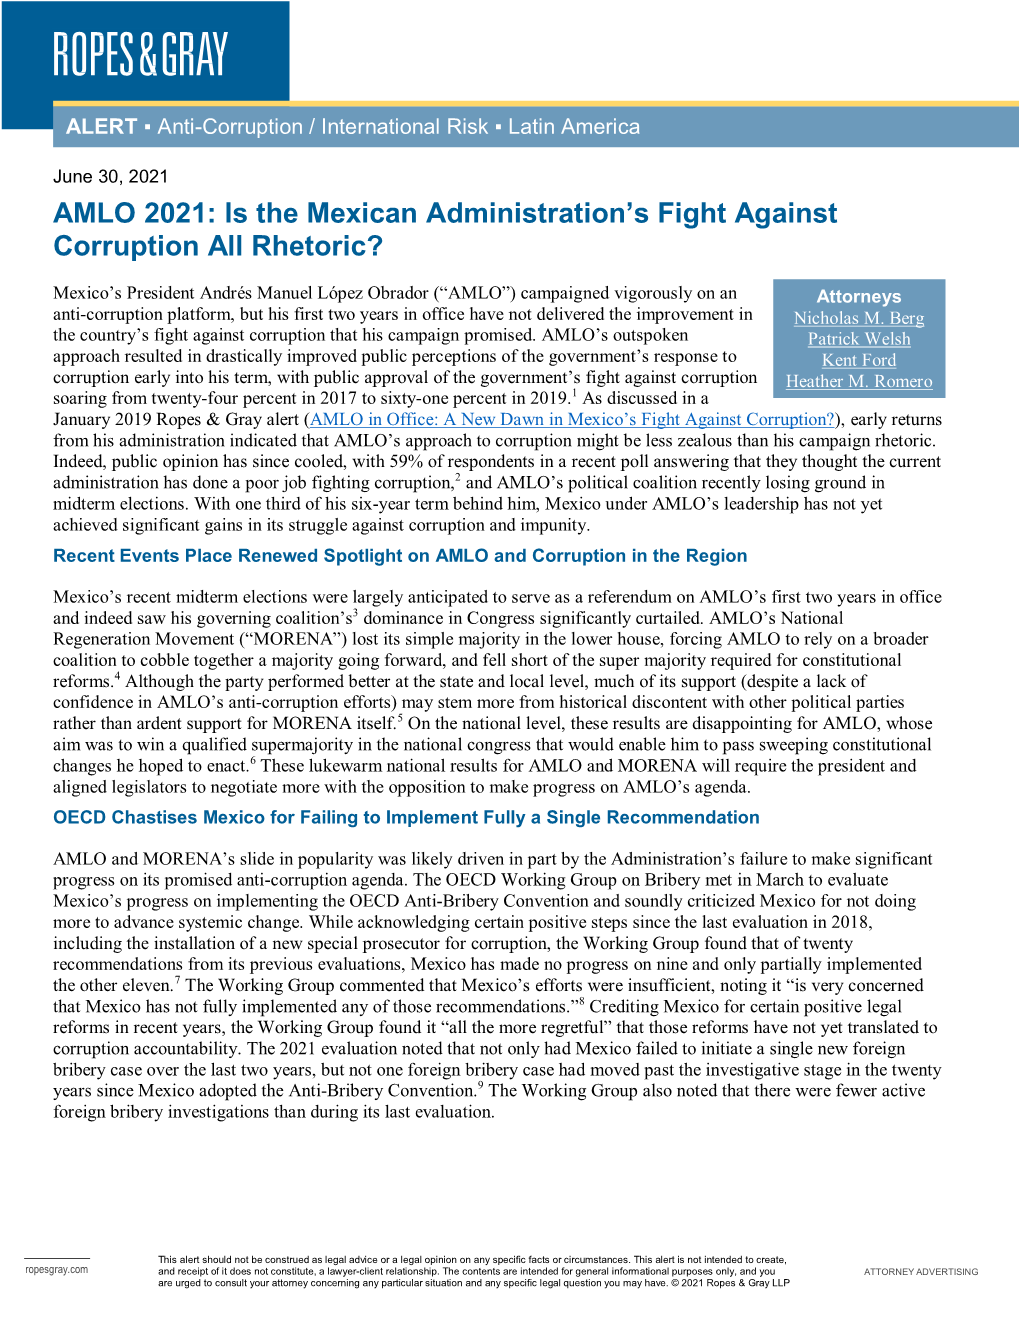 AMLO 2021: Is the Mexican Administration's Fight Against